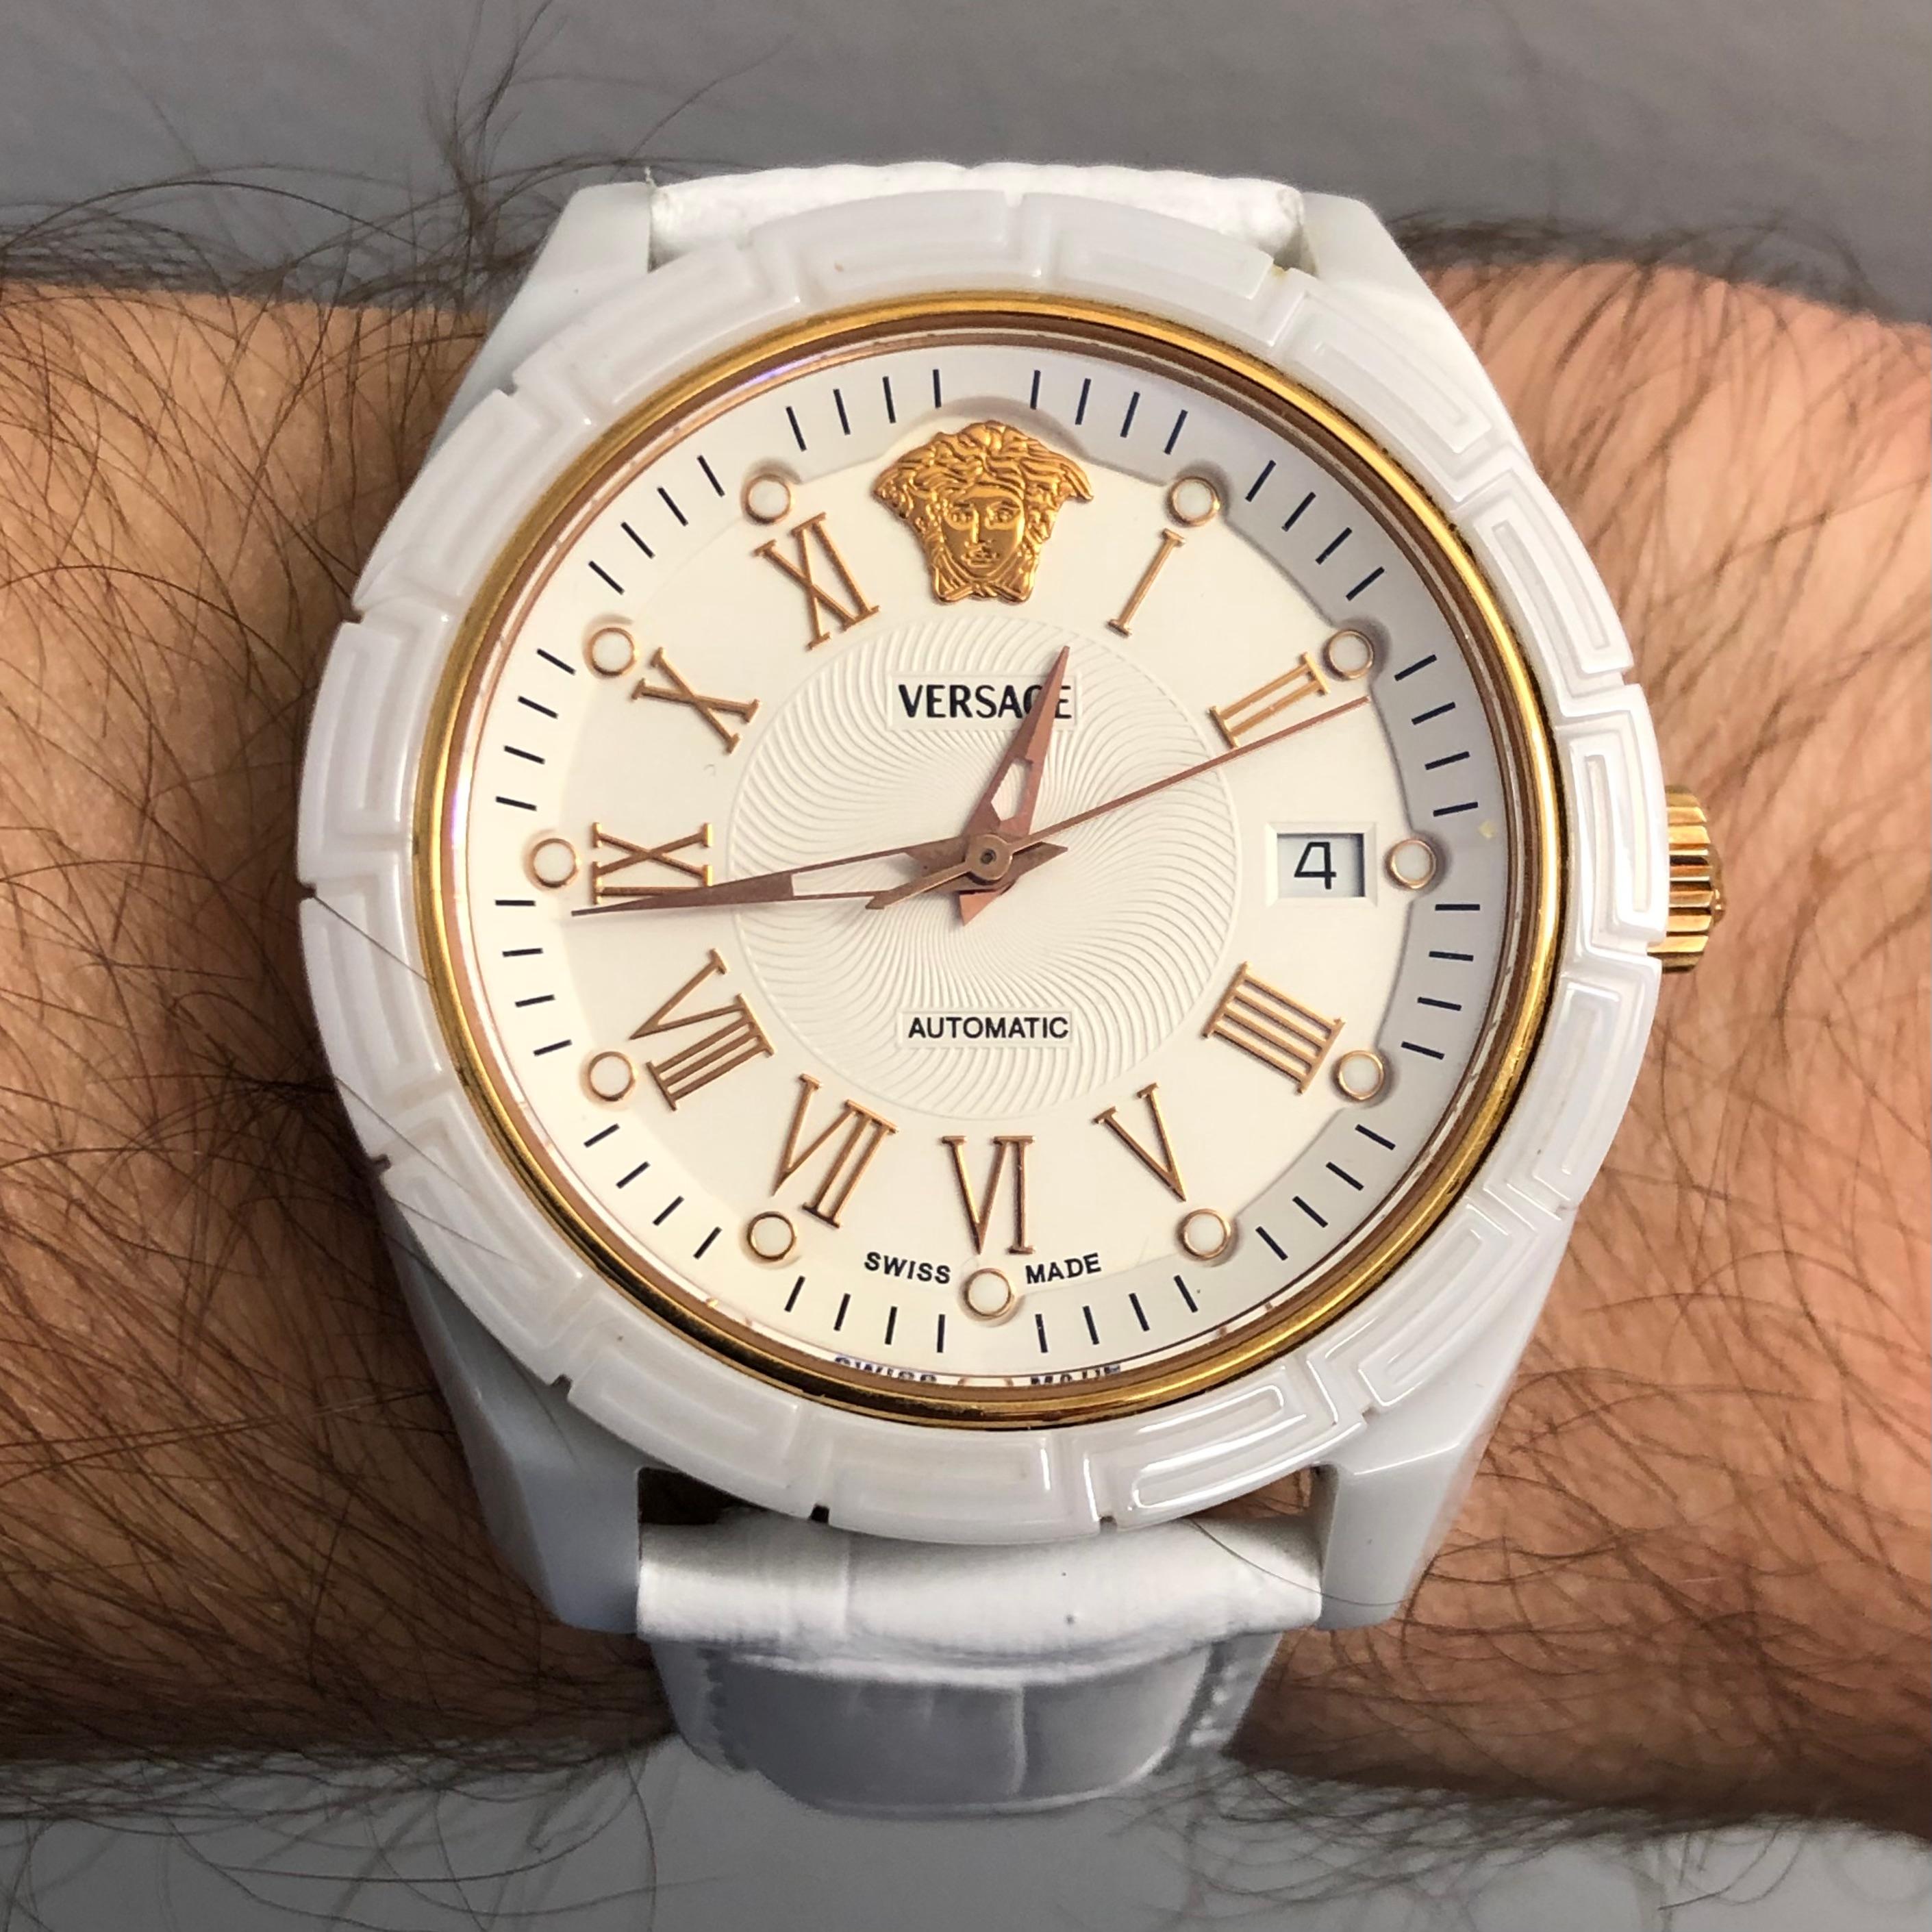 Opulent Men’s DV One Versace Automatic White Ceramic Watch.

This luxury timepiece by Versace’s case is fashioned in ceramic. The gold medusa head on the dial adds to its extravagance.

This watch retails online for $2,995.00 USD on Bloomingdales